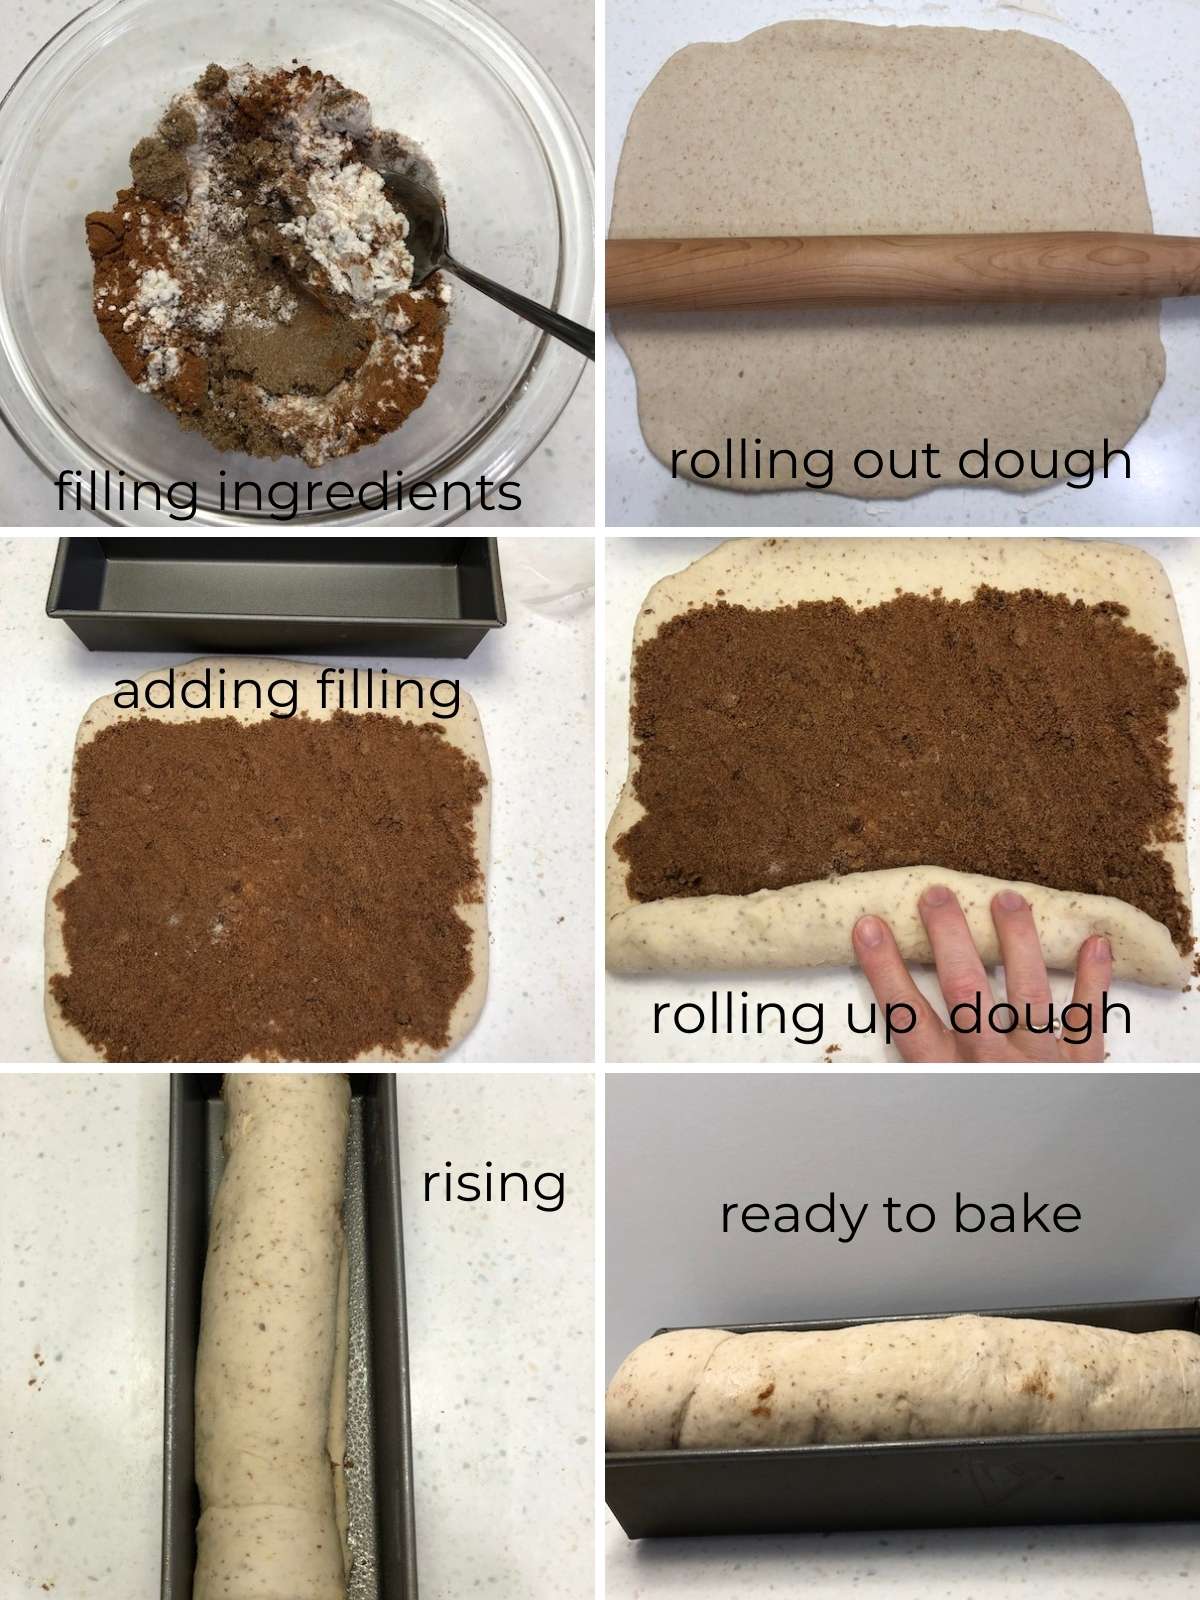 Six photos about making cinnamon bread: filling in bowl, rolling out dough, spreading filling, rolling up dough, dough ready to rise dough ready to bake